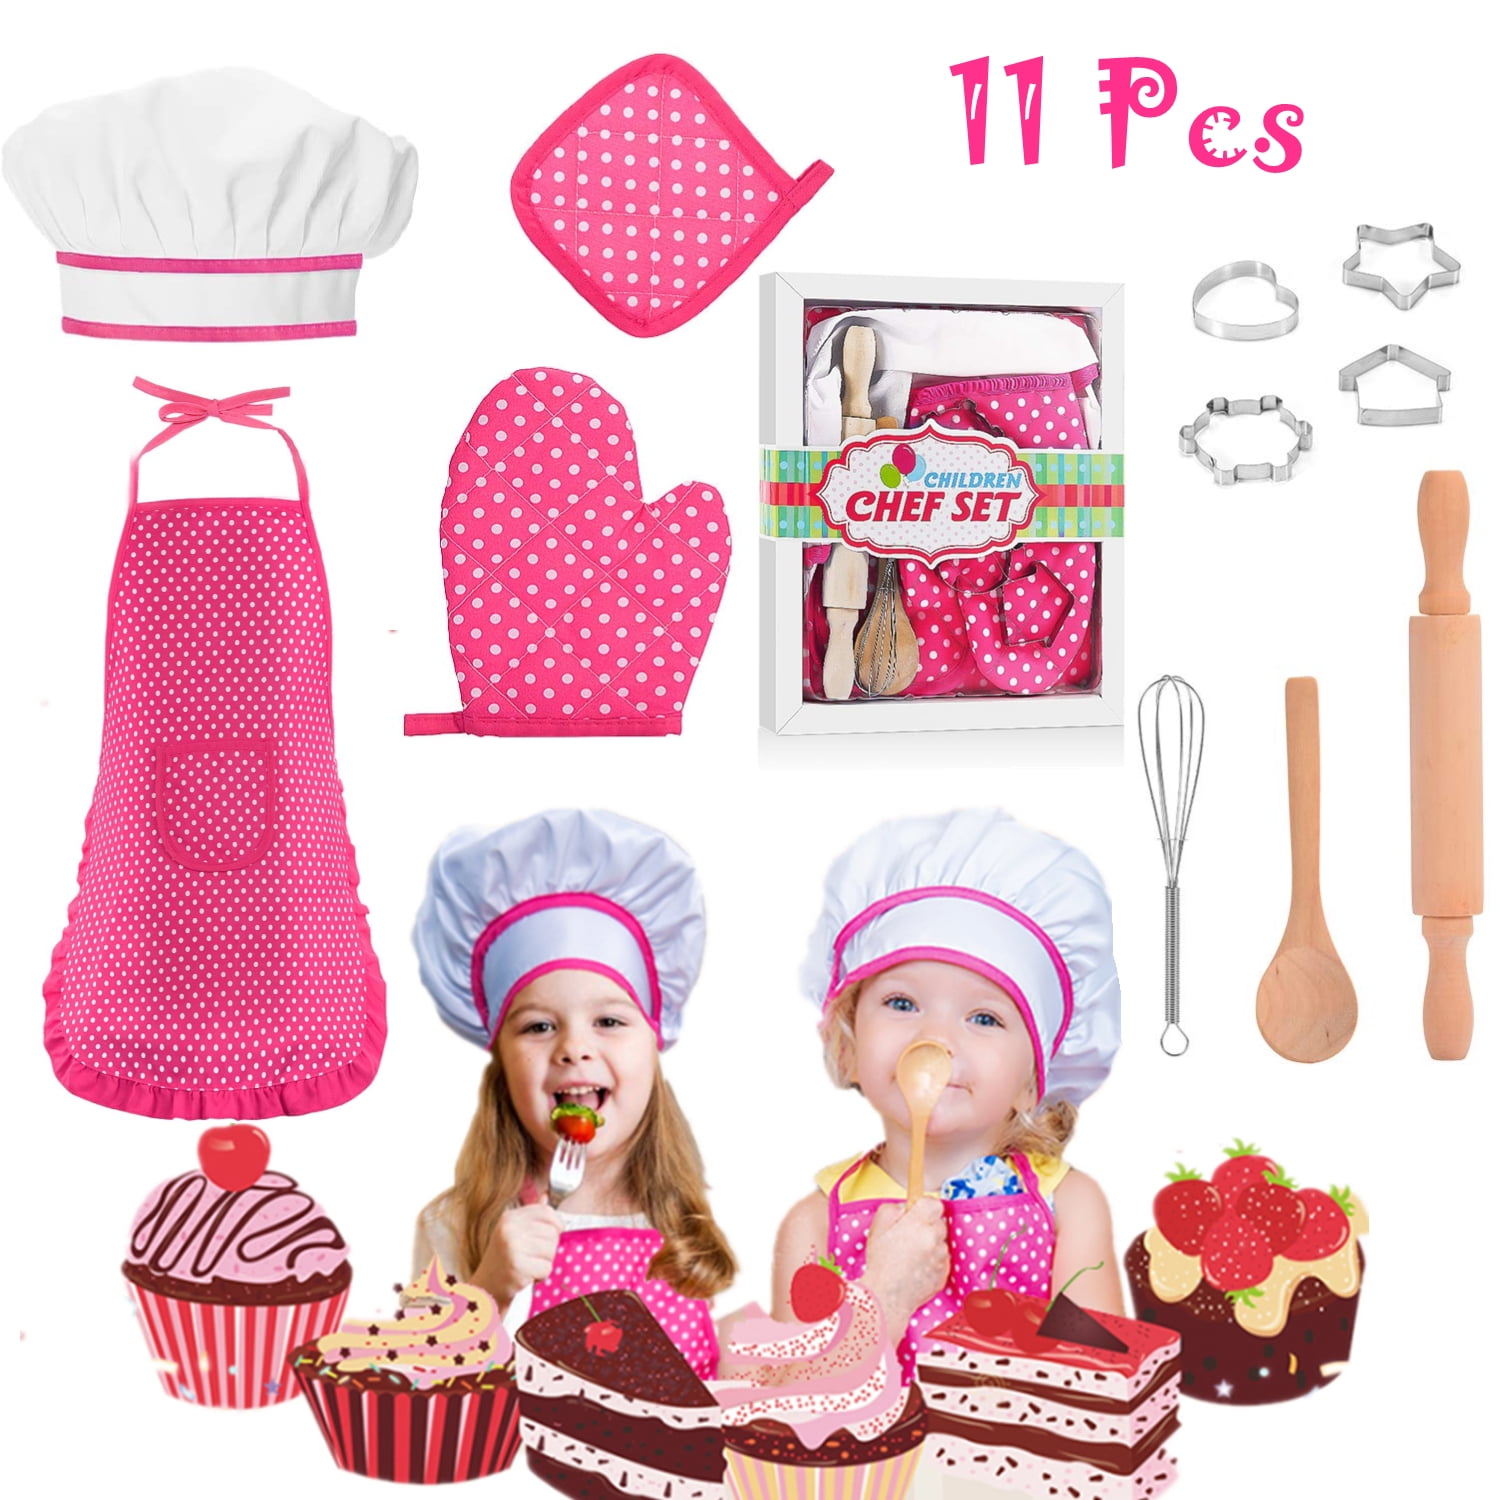 Kids Toy Baking Set Toddler Kitchen Play Pretend Cookie Cupcakes Rolling Pin New 